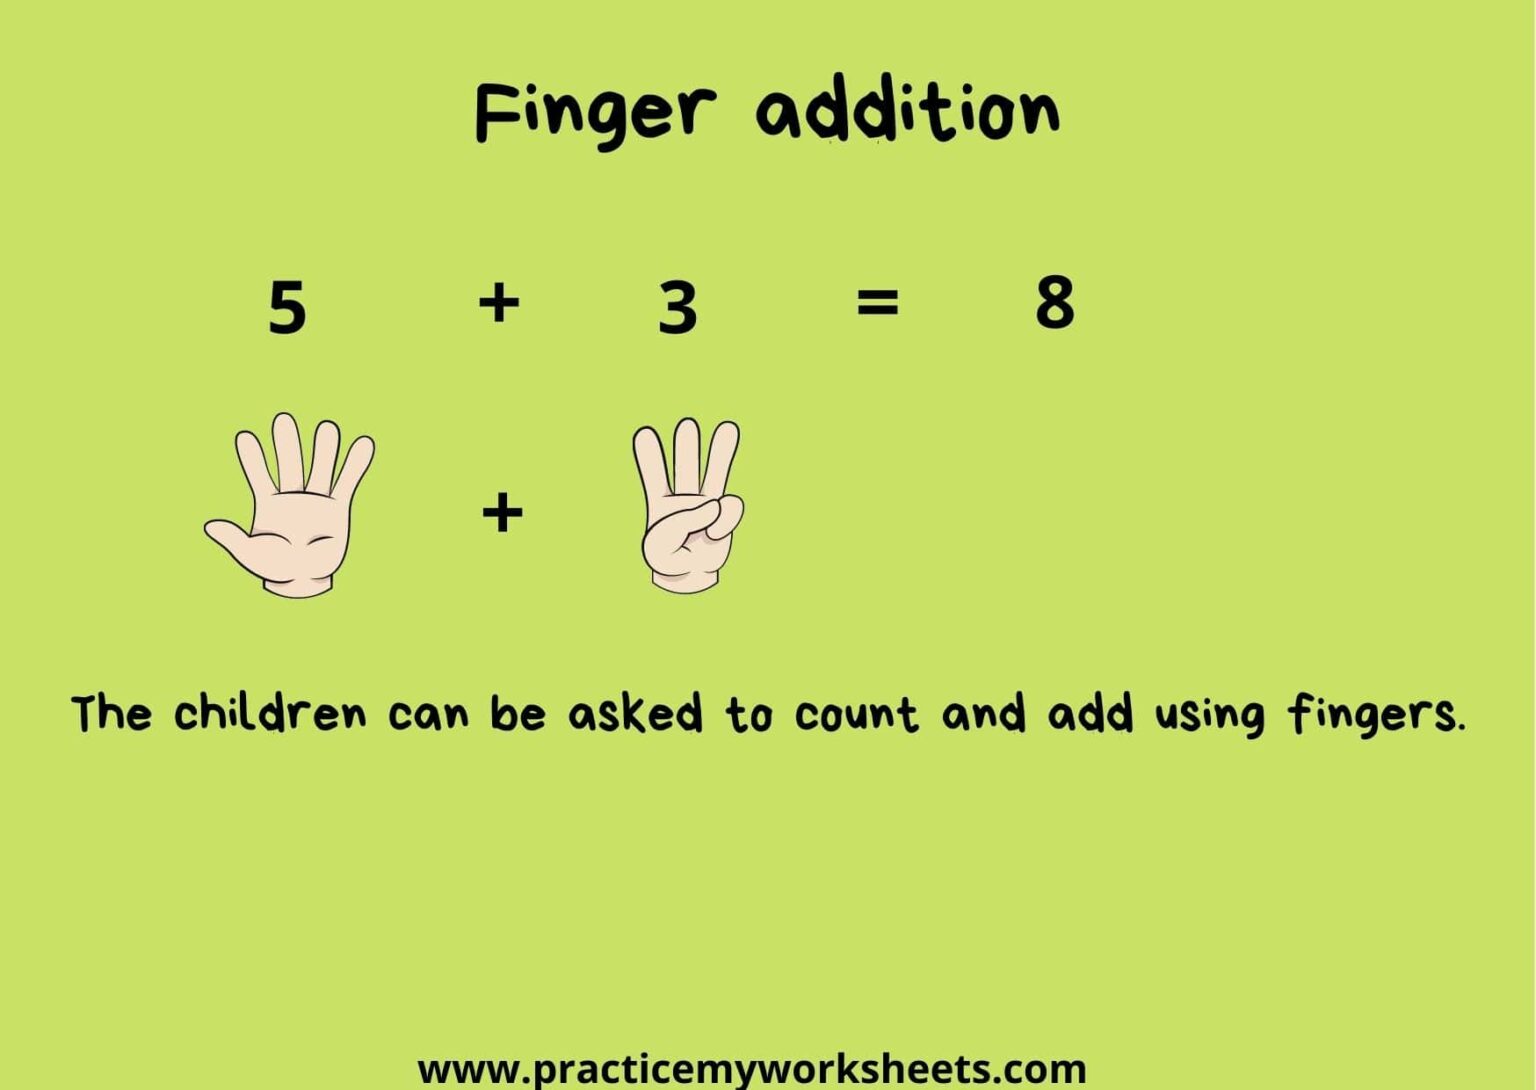 addition-for-class-1-free-worksheets-practice-my-worksheets